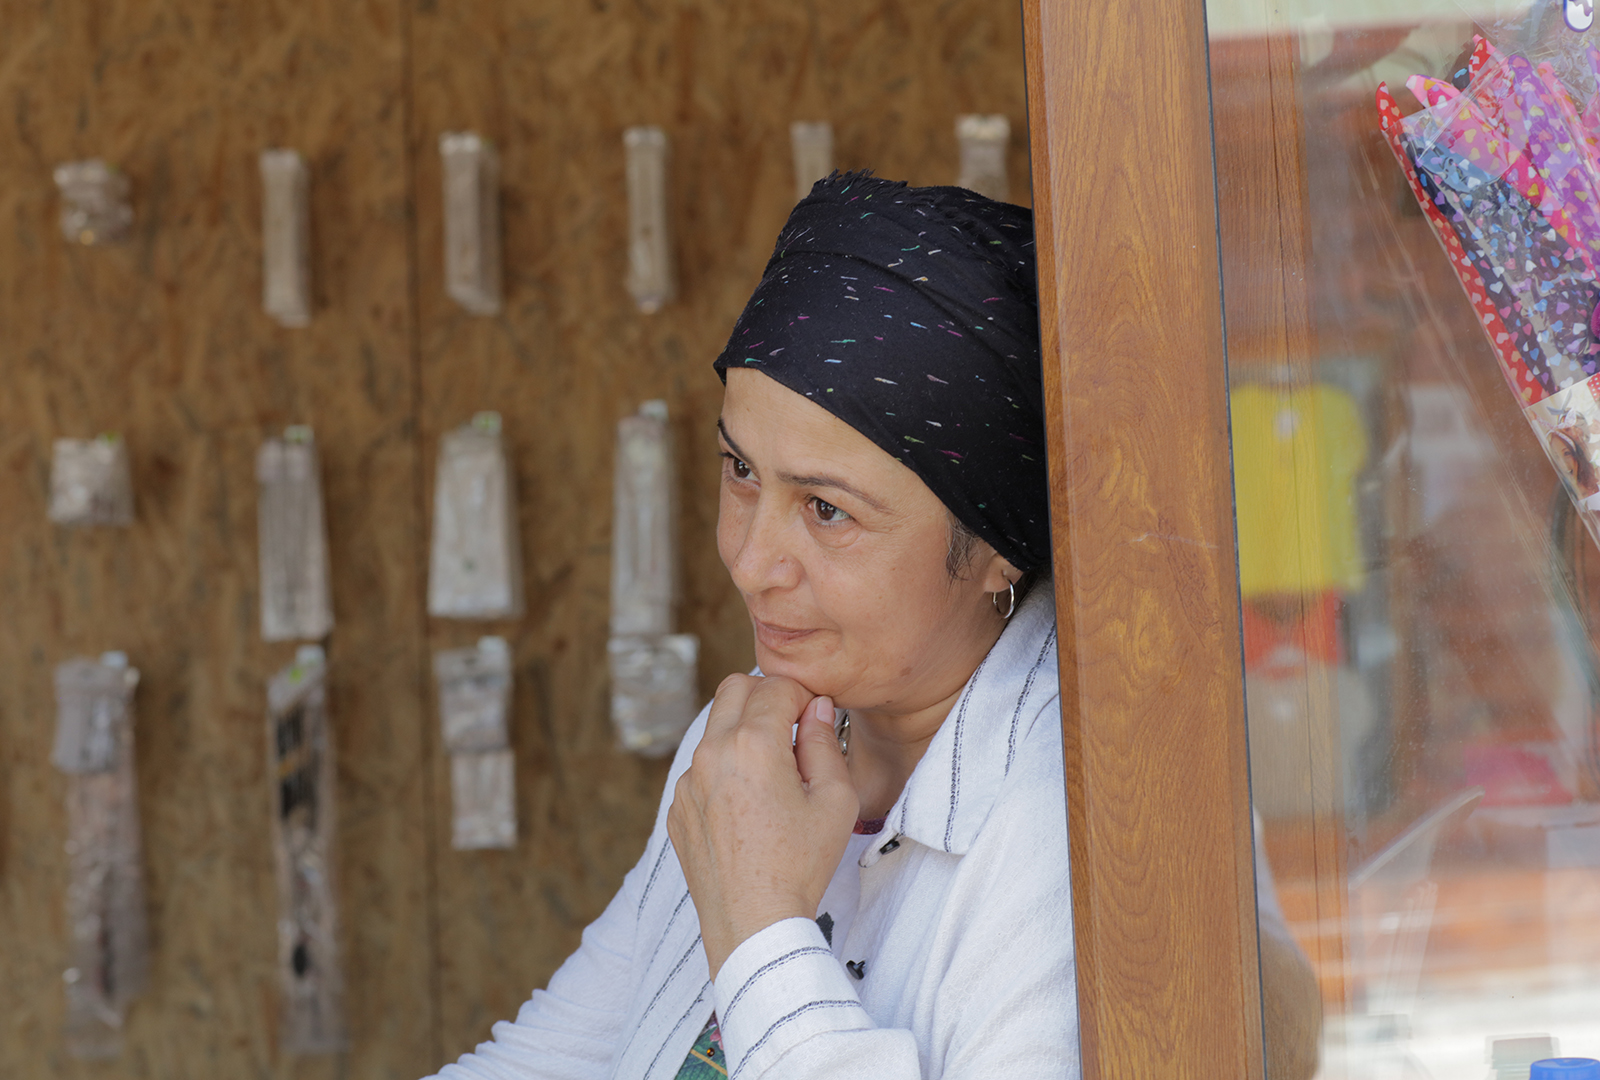 Nesrin sits inside her new shop in the Hassa district of Hatay in Turkey after the devastating earthquake on February 6, 2023.